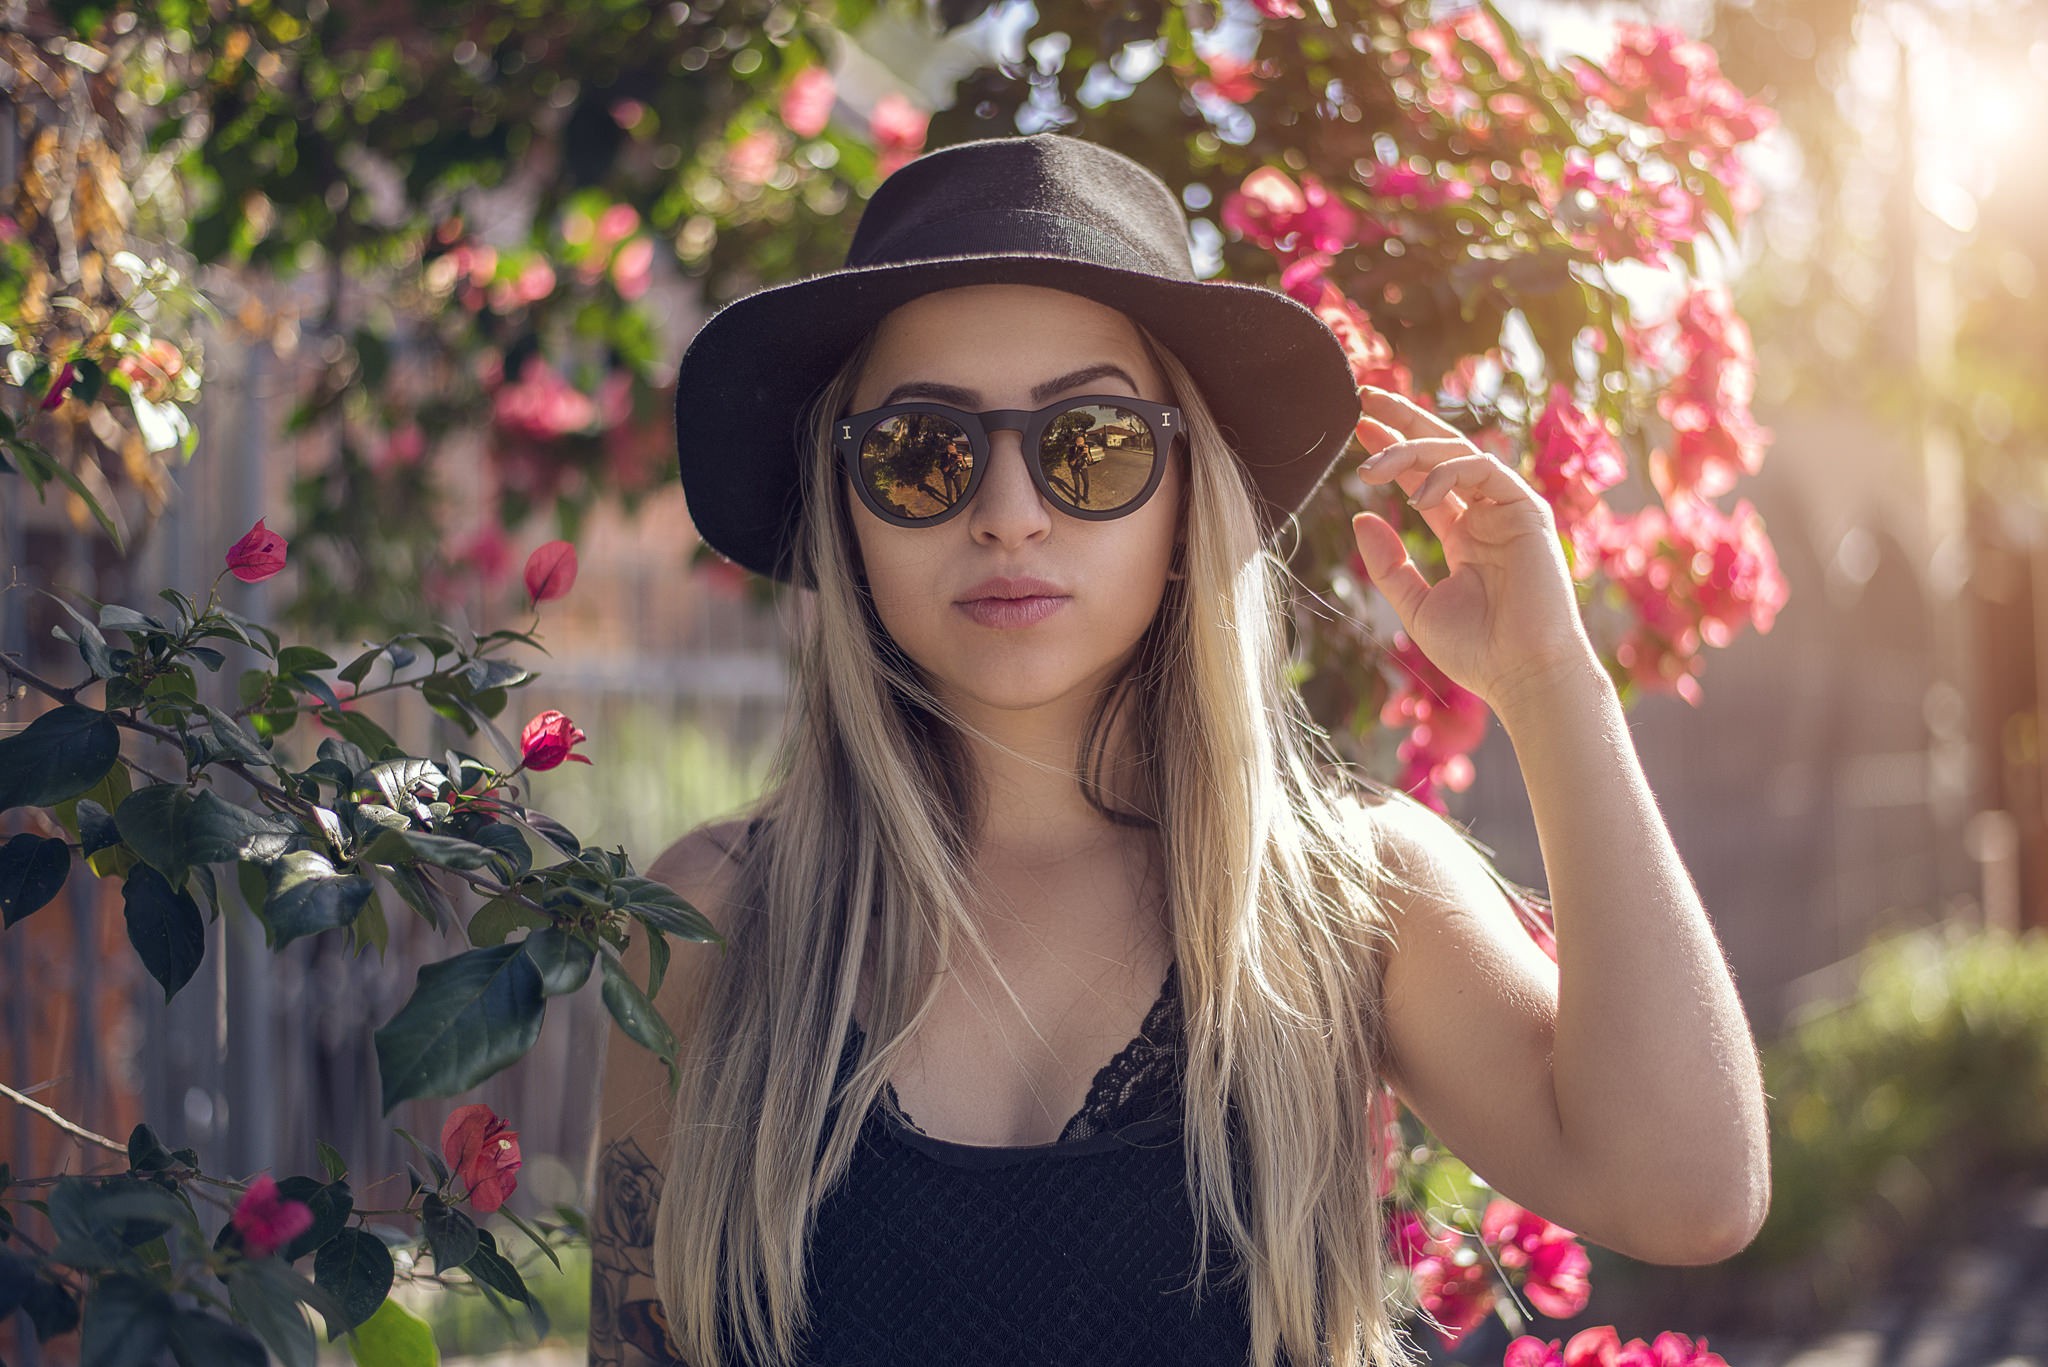 People 2048x1367 women model blonde face portrait women with glasses hat sunglasses flowers plants women outdoors looking at viewer women with hats long hair dyed hair sunlight women with shades